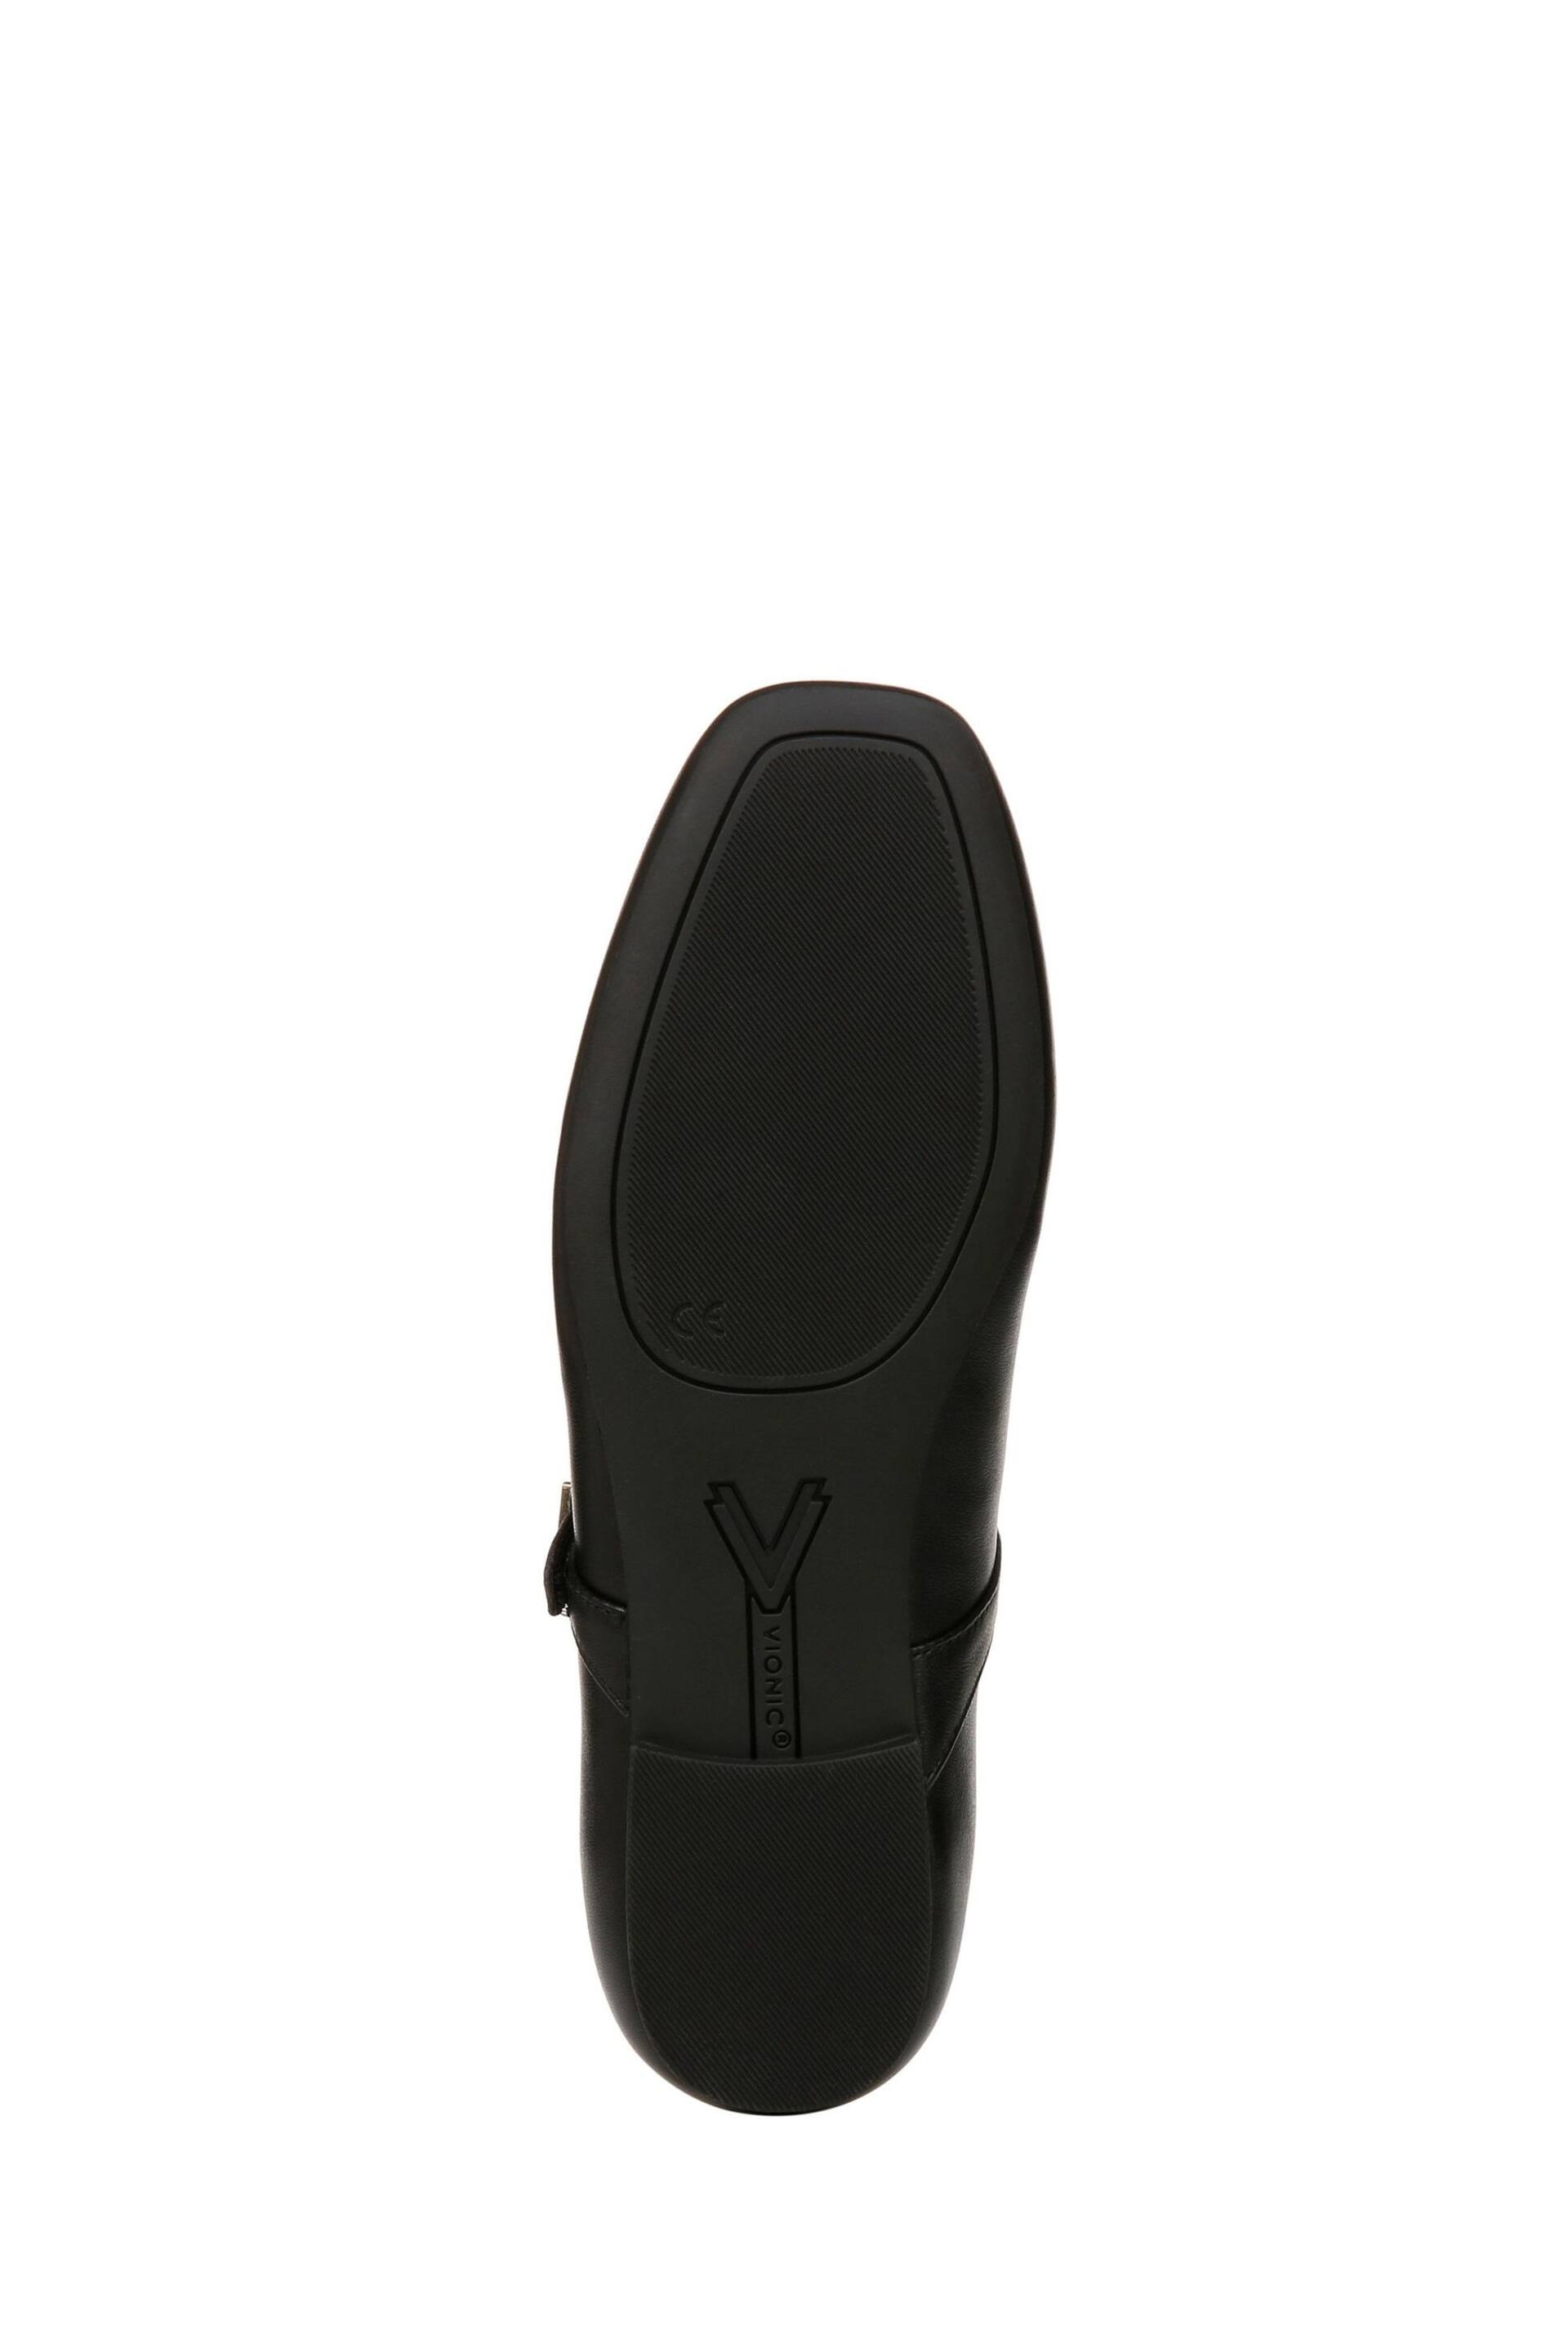 Vionic Alameda Wide Fit Mary Jane Shoes - Image 7 of 7